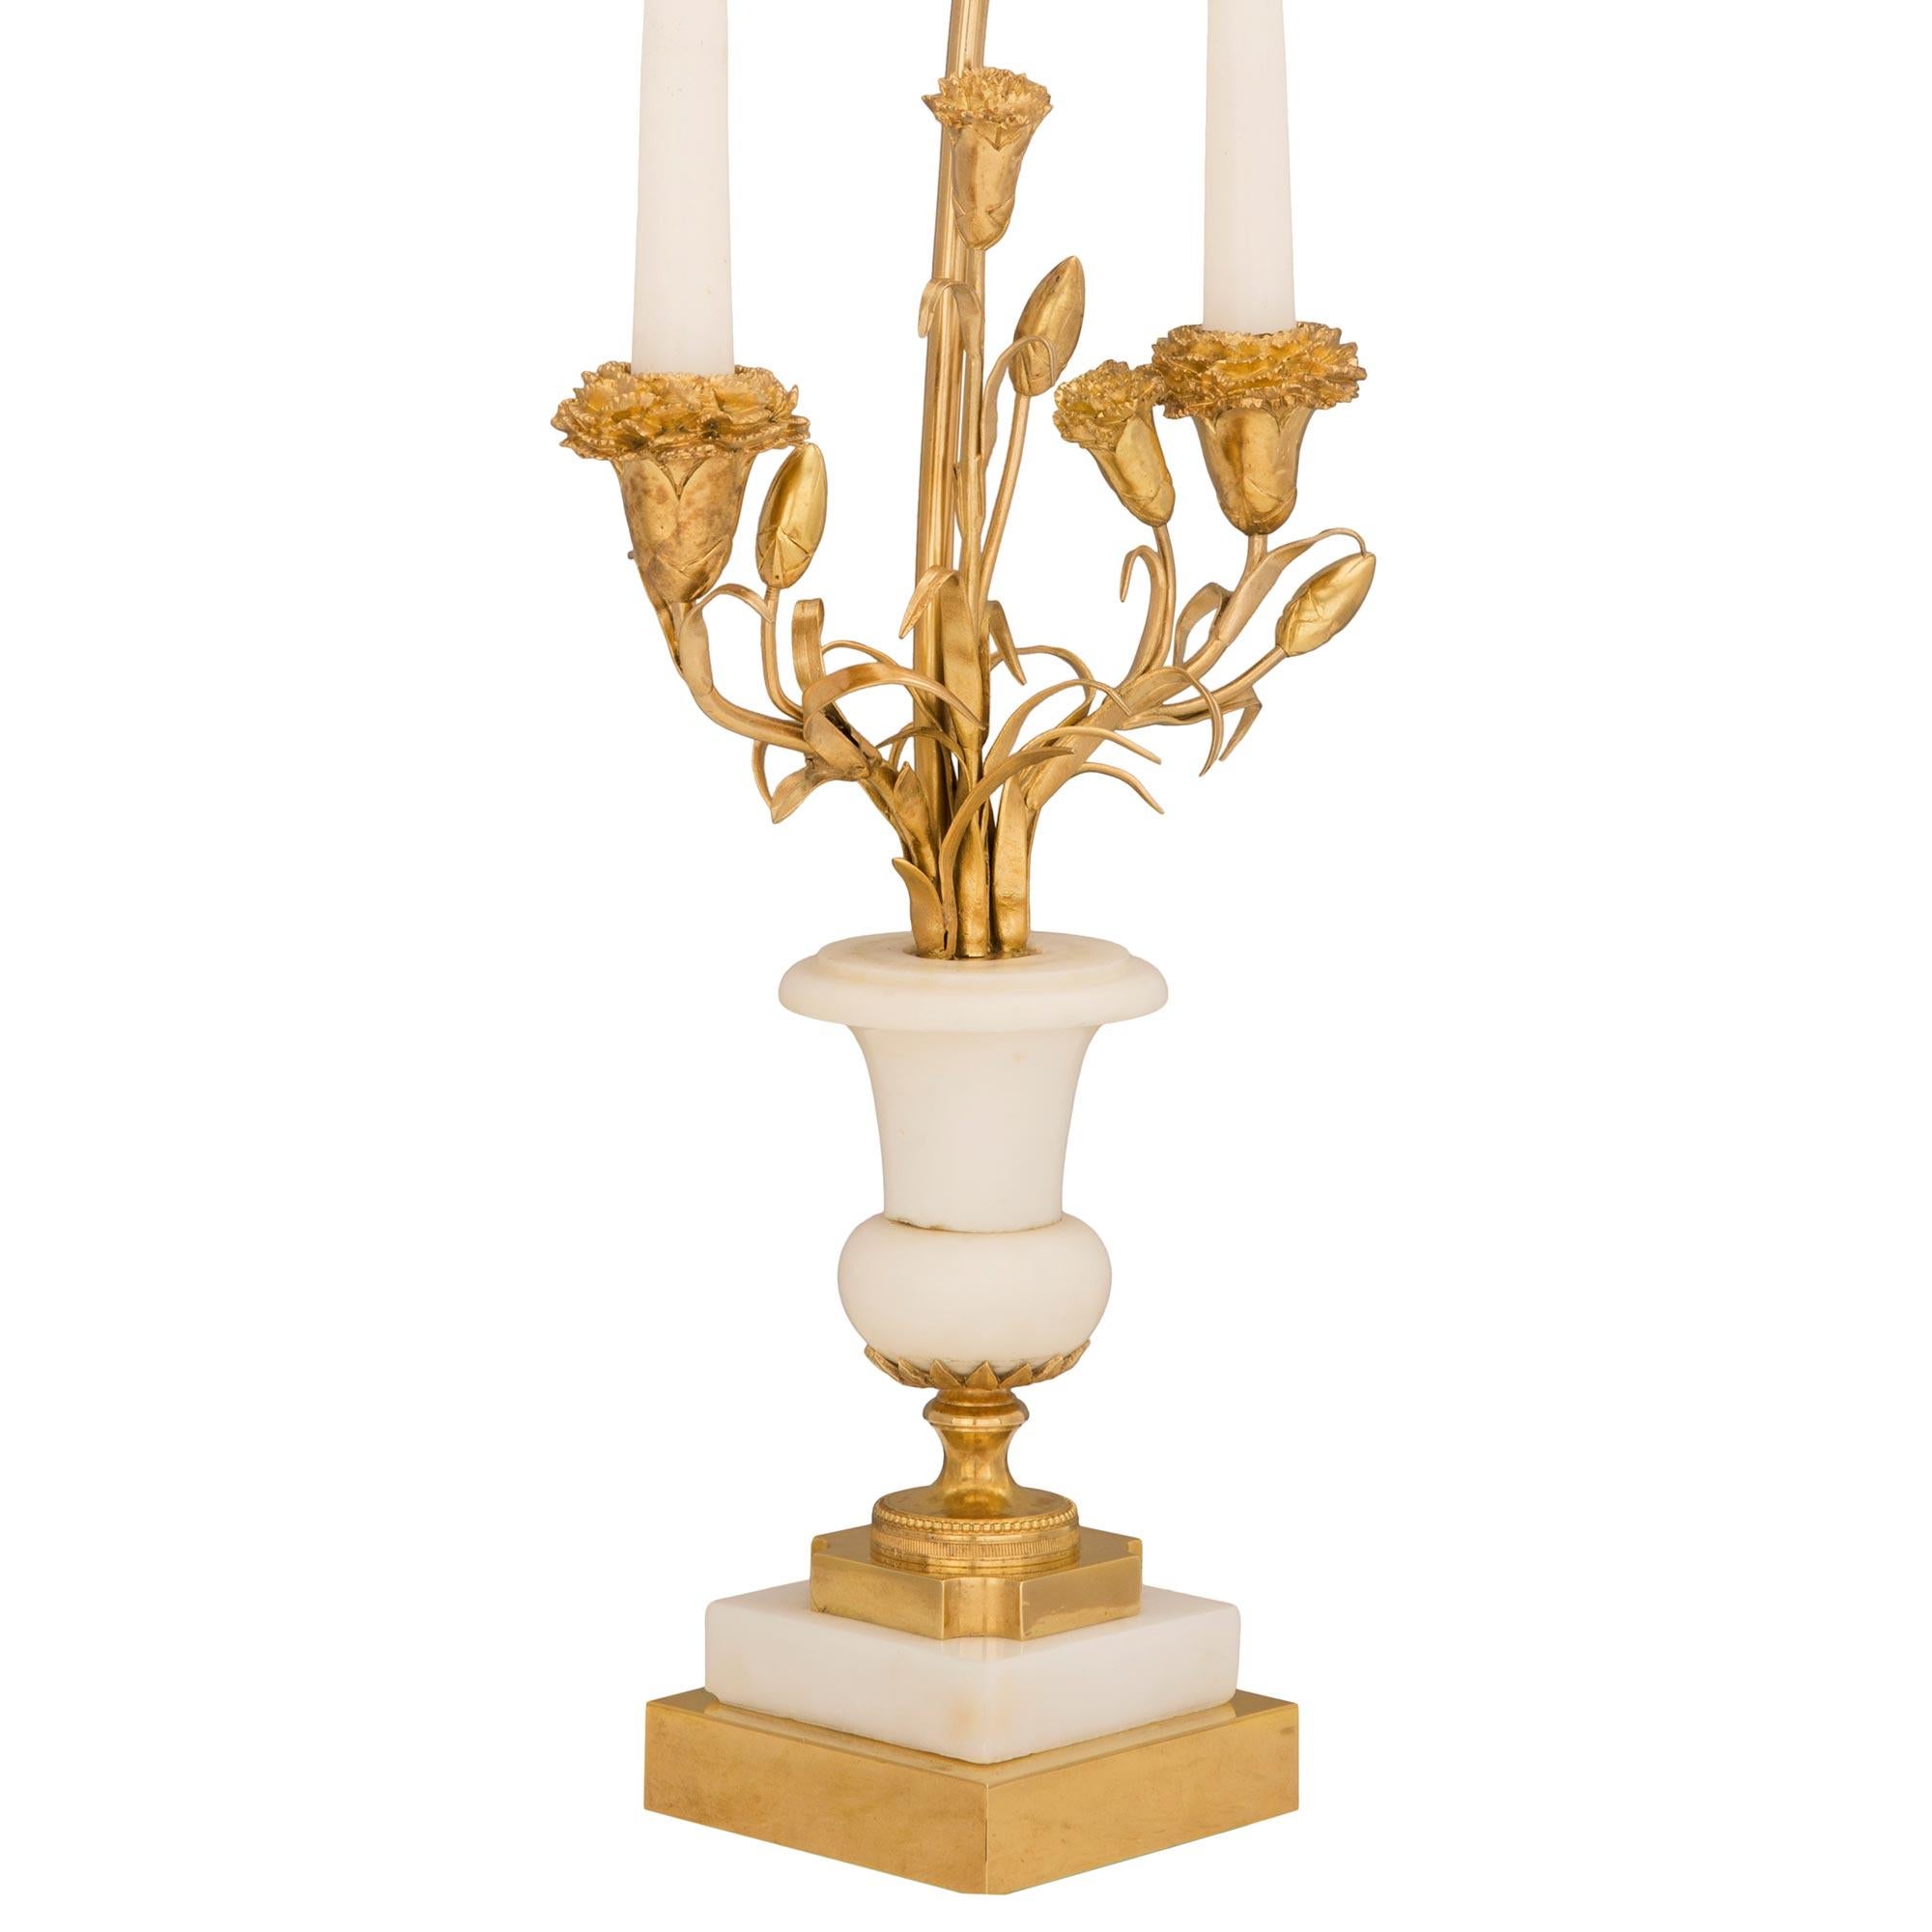 An exquisite pair of French late 19th century Louis XVI st. ormolu and white Carrara marble candelabras lamps. Each lamp is raised by a square ormolu base with fine bun feet below the socle shaped pedestal with wrap around beaded bands and cut